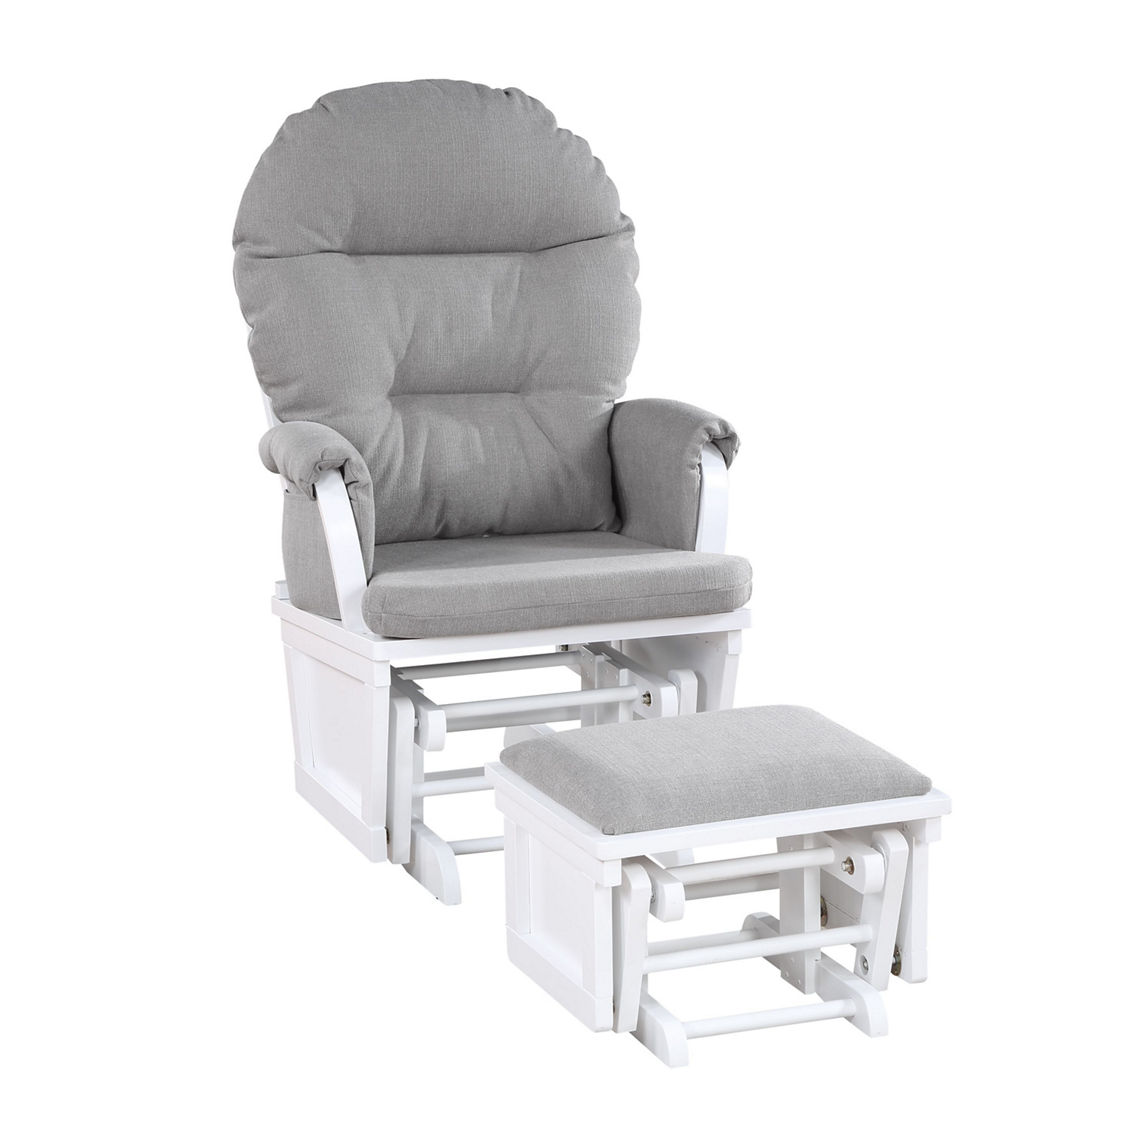 Suite Bebe Madison Glider and Ottoman White/Oyster - Image 3 of 5